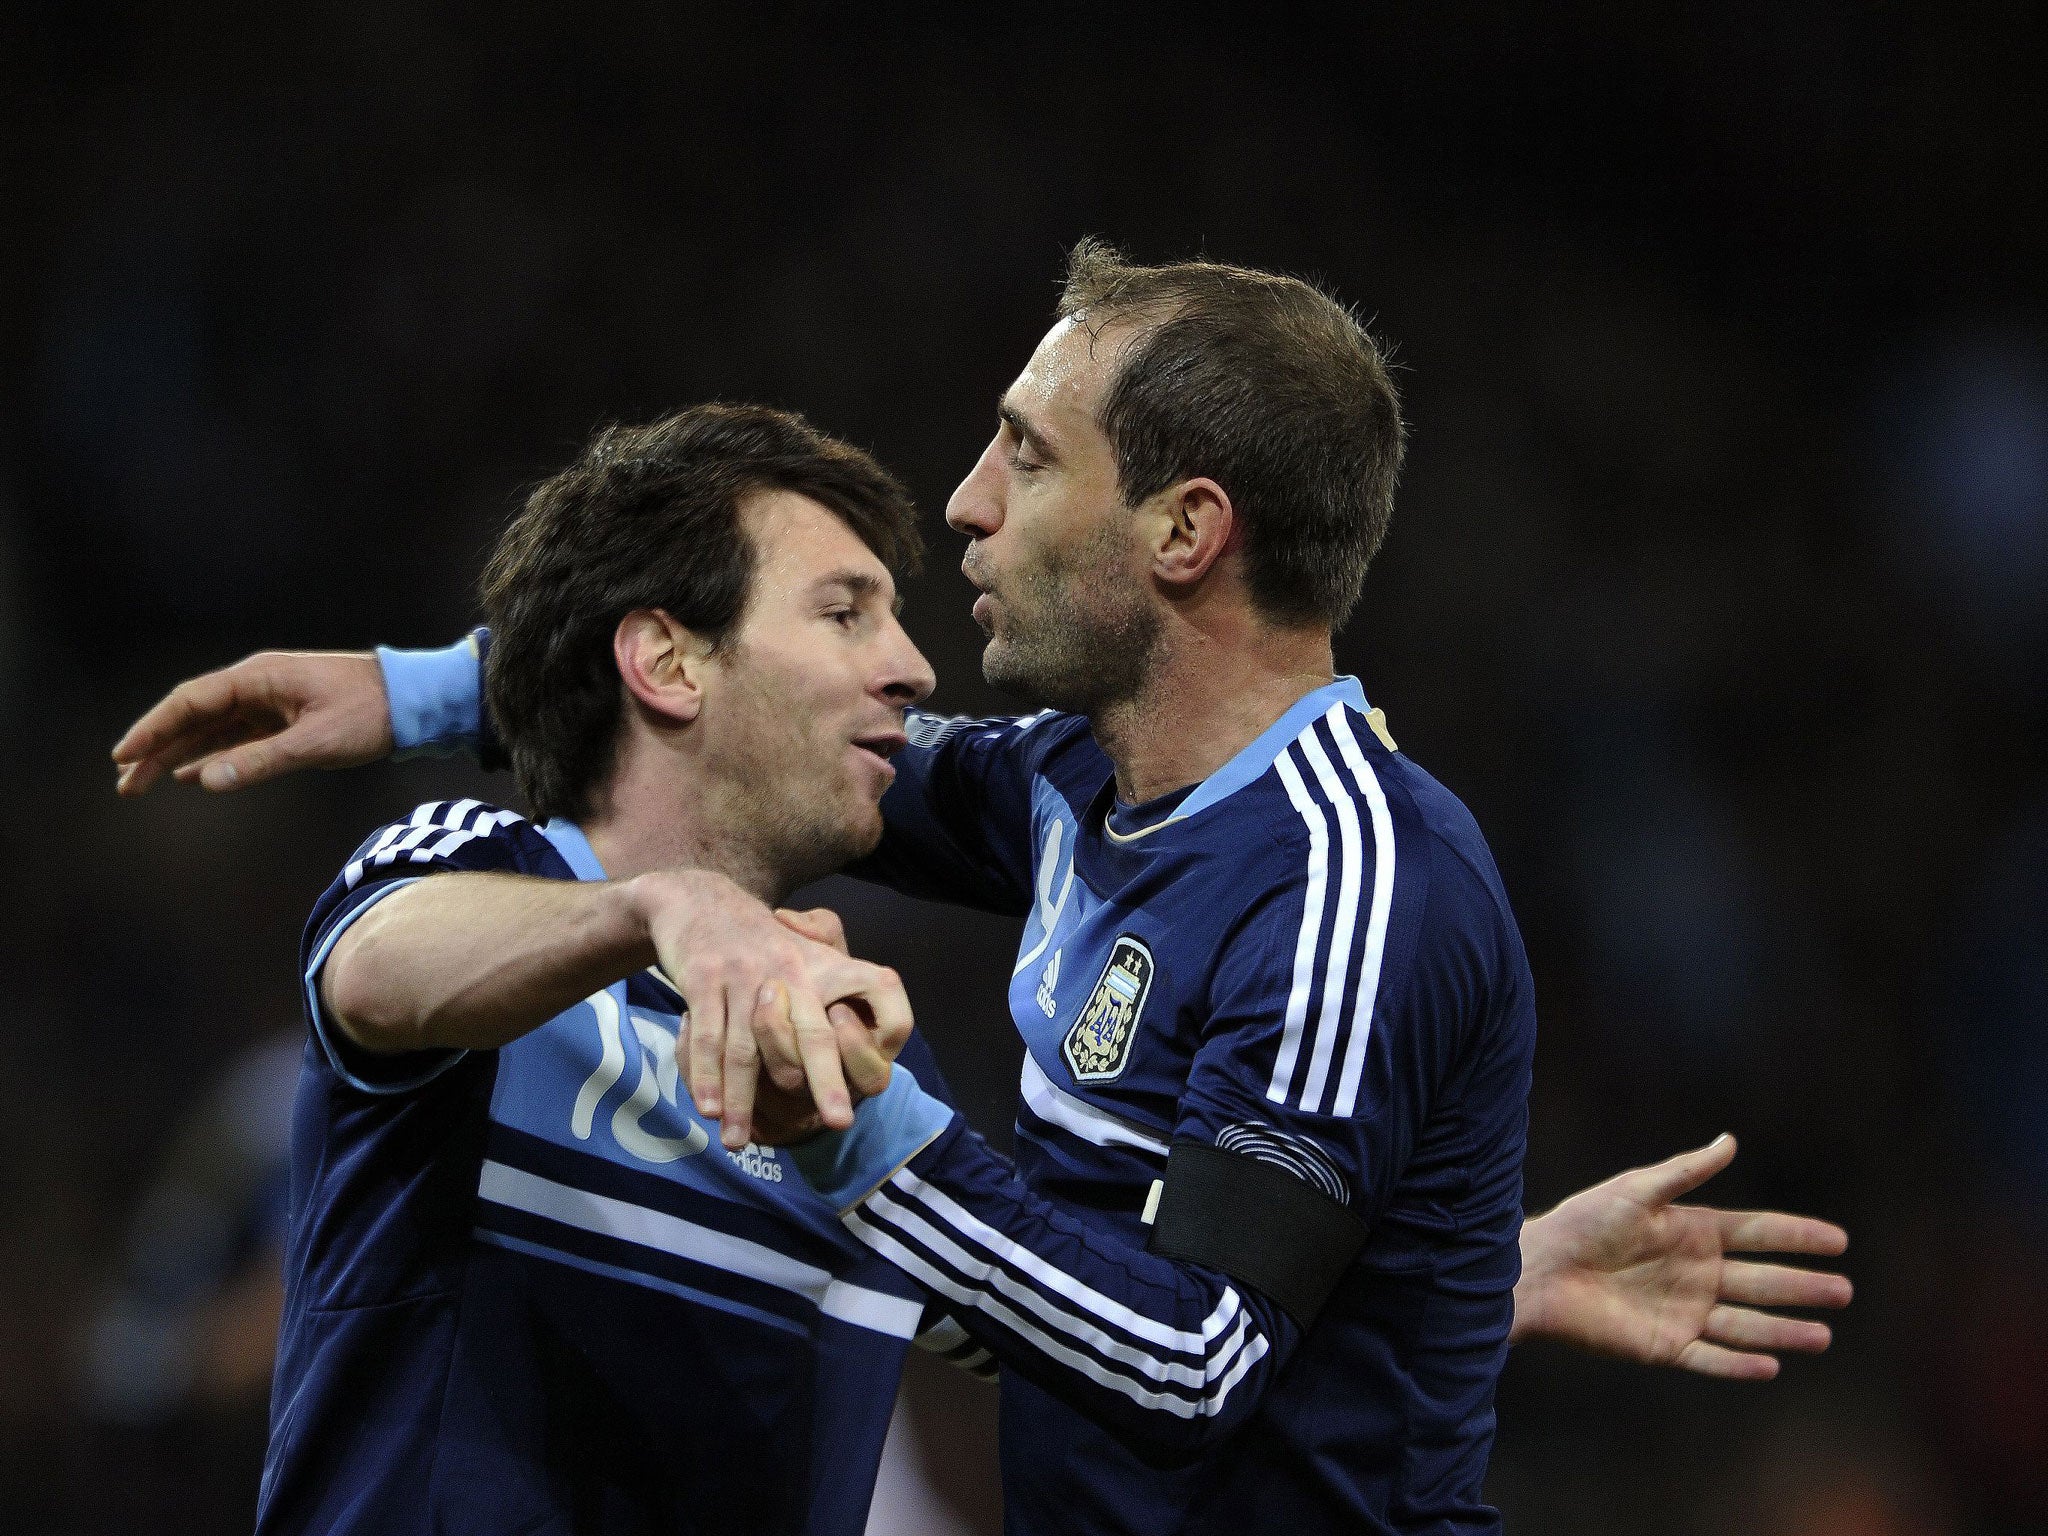 Lionel Messi has asked Pablo Zabaleta what life is like at Manchester City, according to the Argentinian defender